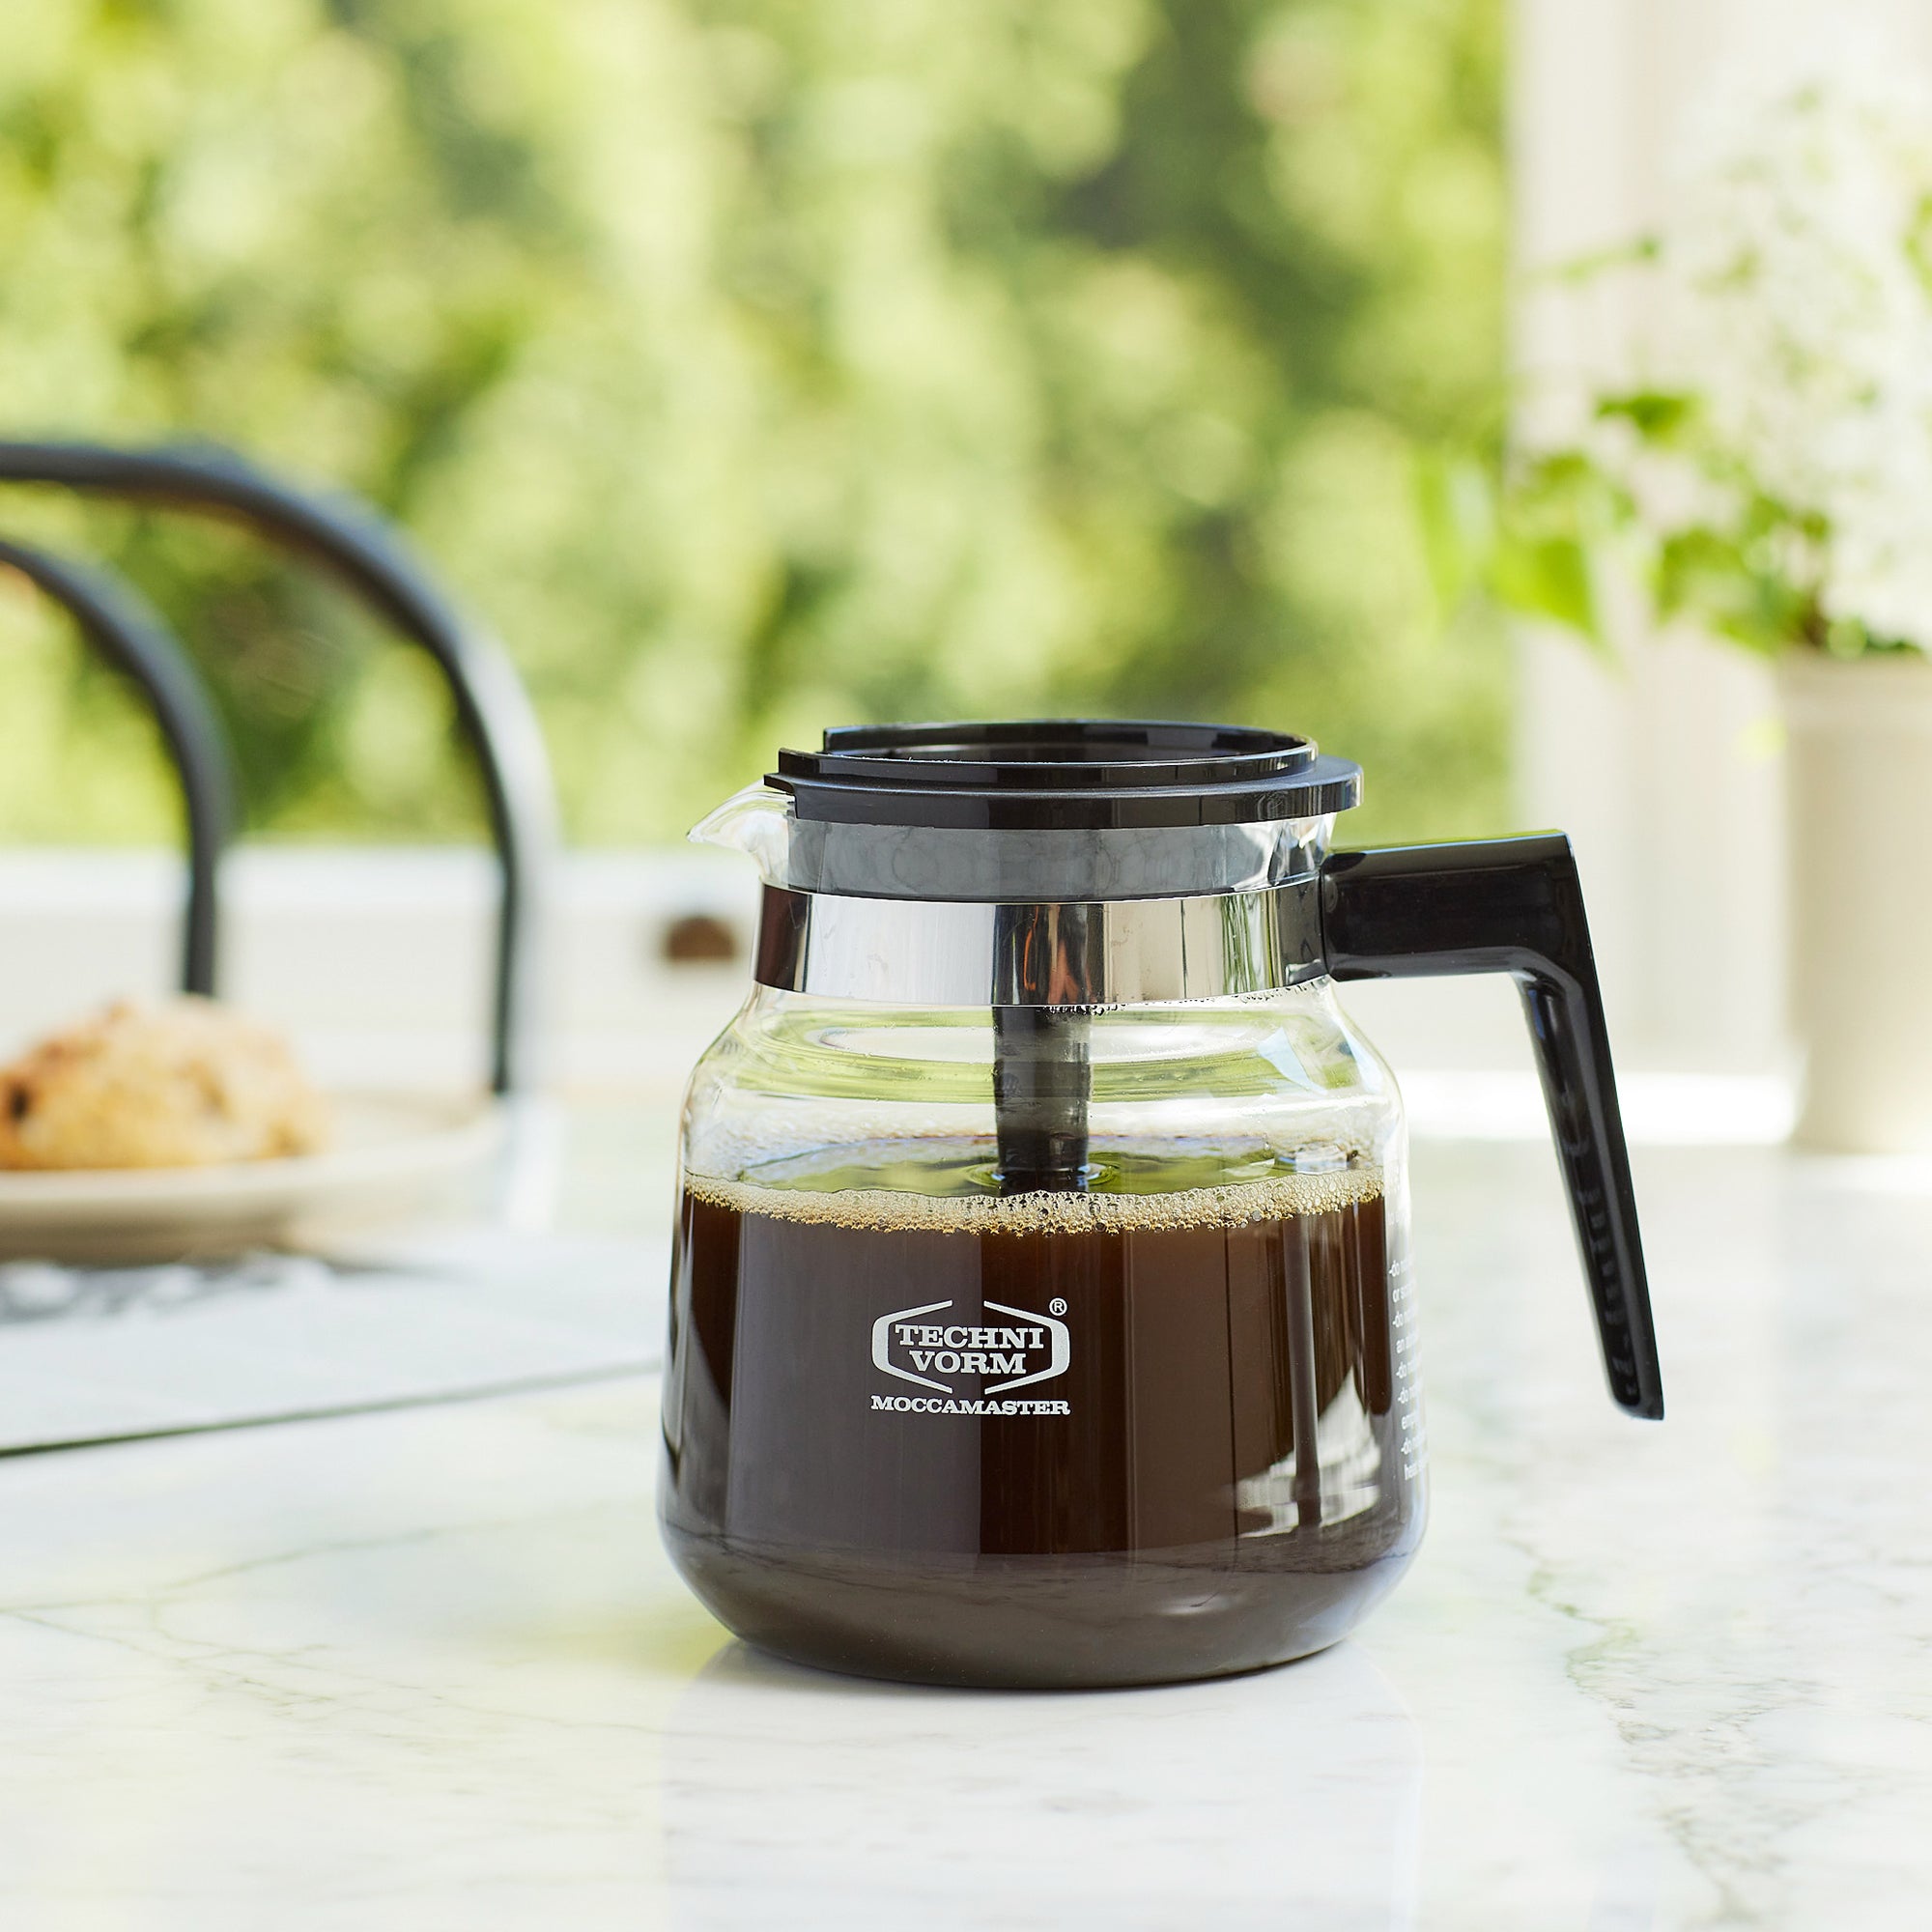 Glass coffee carafe for a Moccamaster KB coffee brewer.